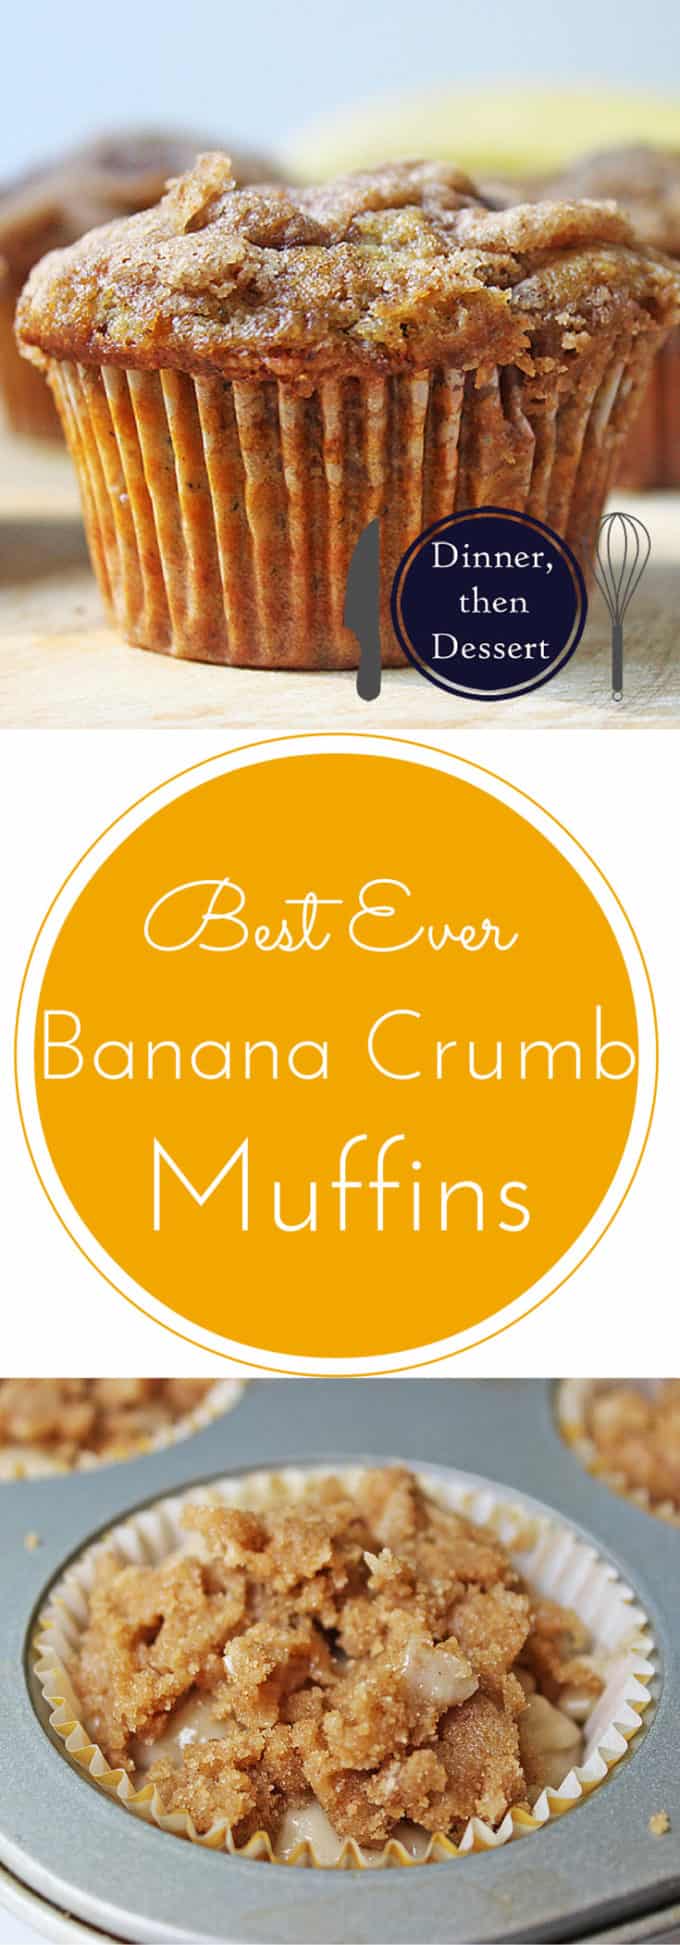 Easy, buttery brown sugar crumb topped tender banana muffins. A quick delicious way to use up over-ripe bananas!